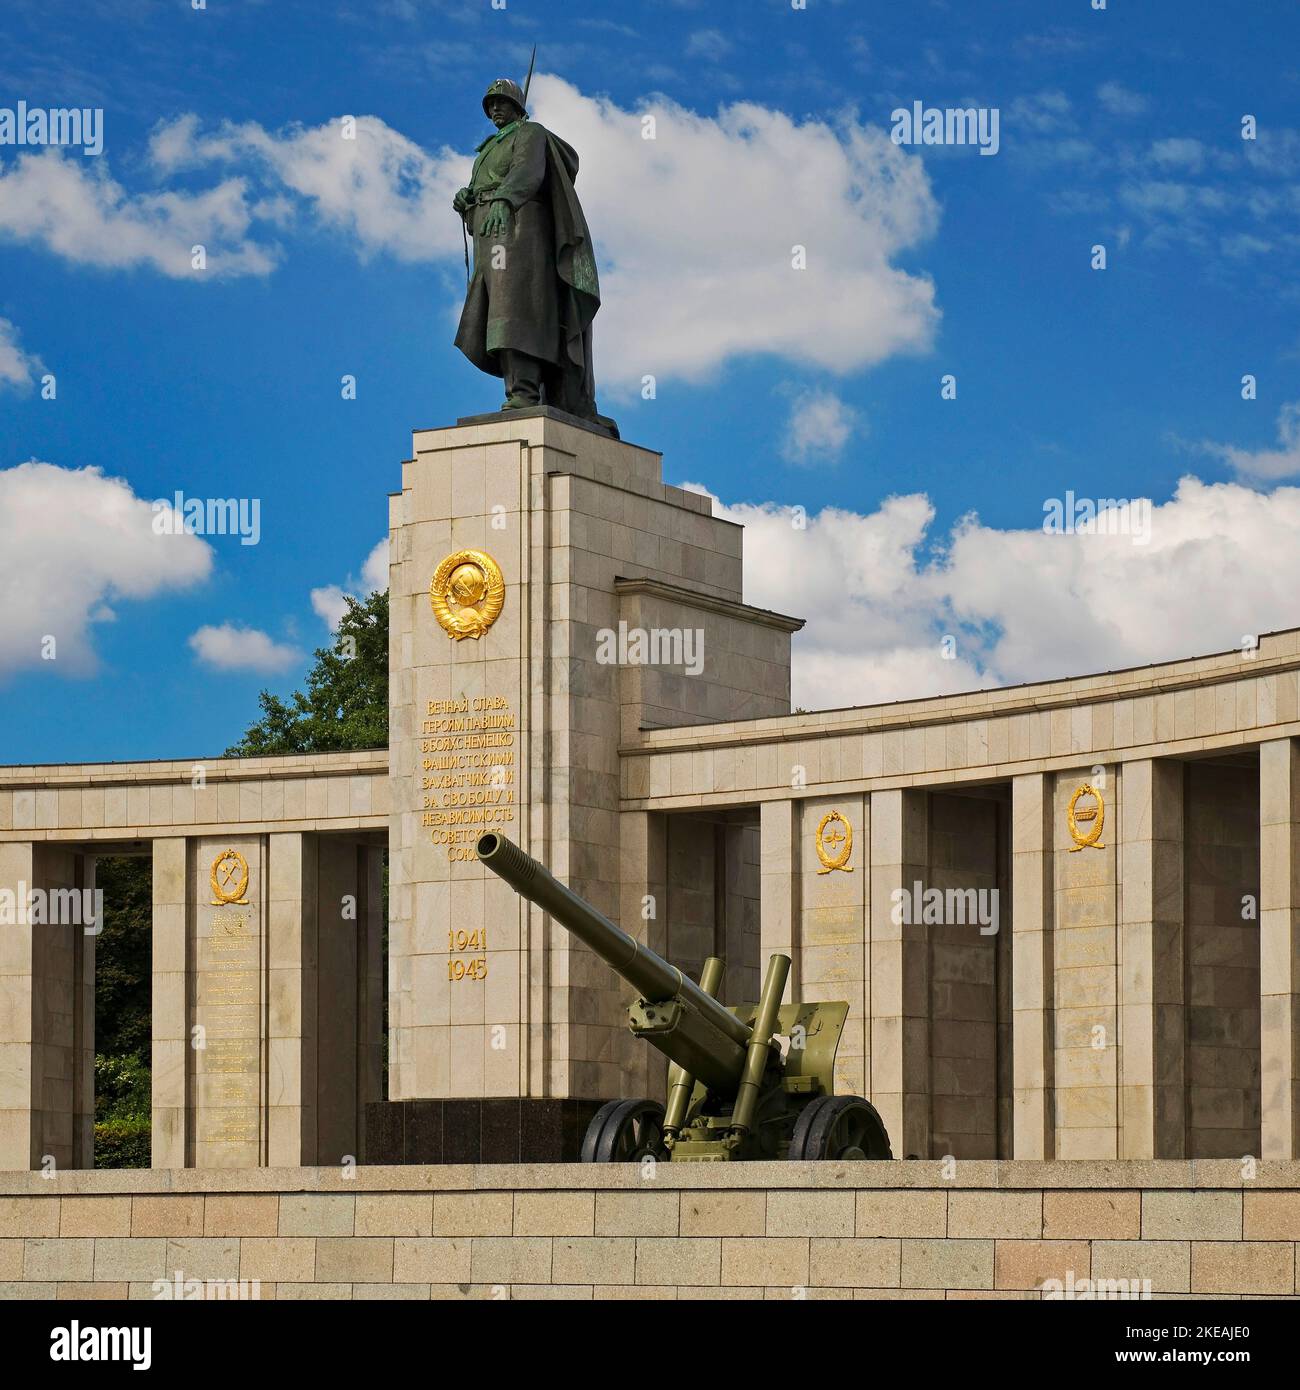 Soviet memorial with the statue of the Red Army soldier and the Golden State Coat of Arms, Tiergarten, Germany, Berlin Stock Photo